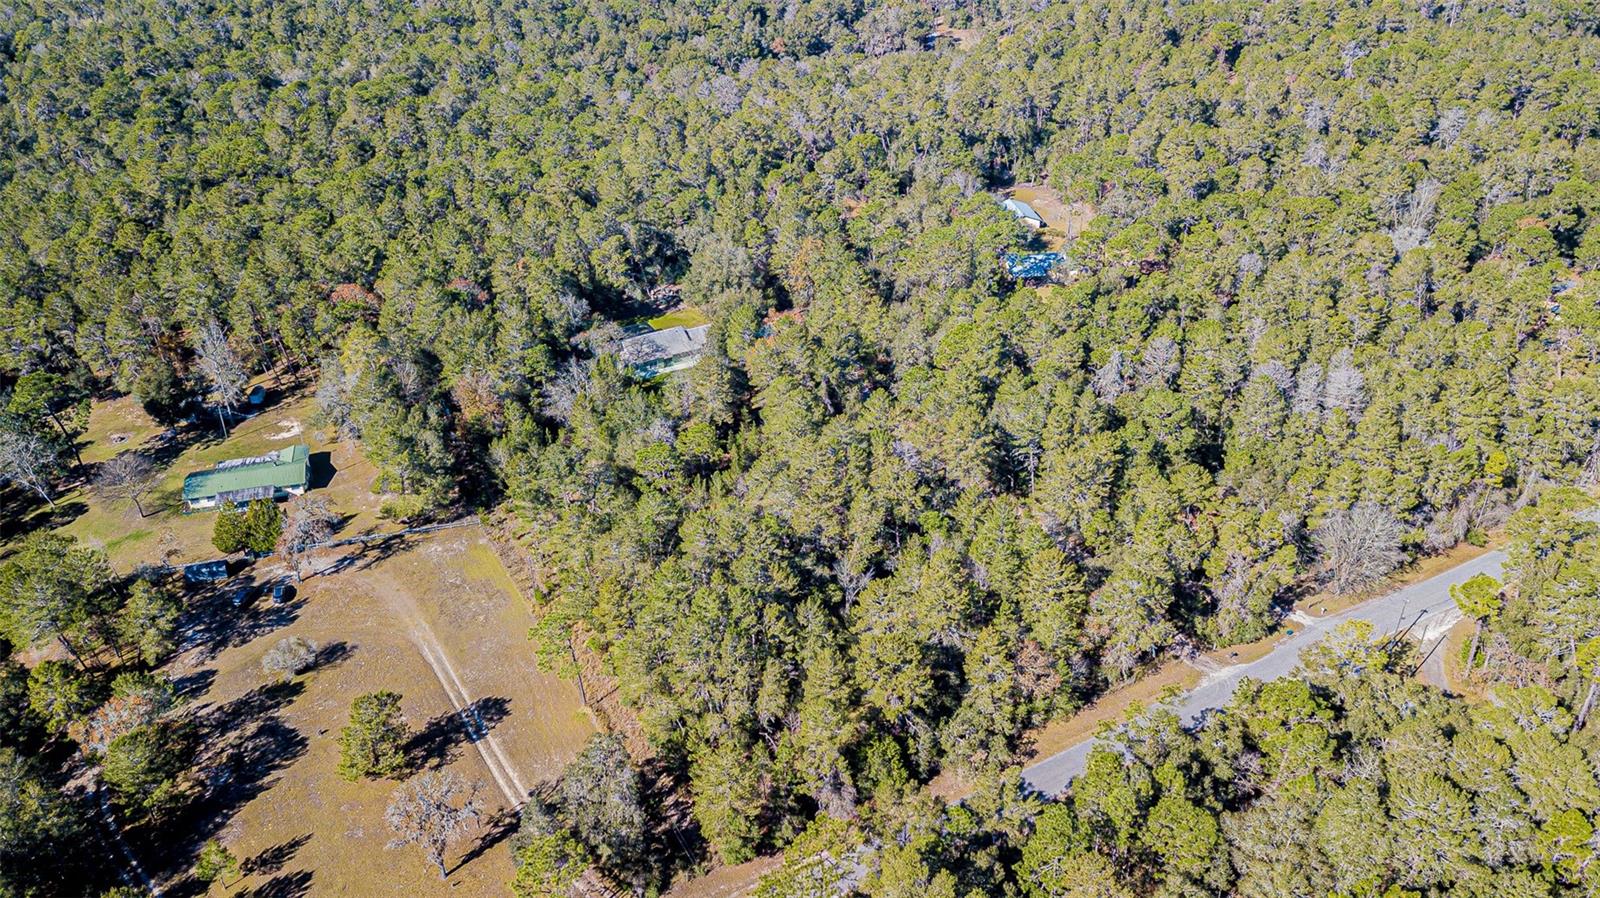 Not the green roof, but the one in the center. Five acres MOL of gorgeous wooded property!